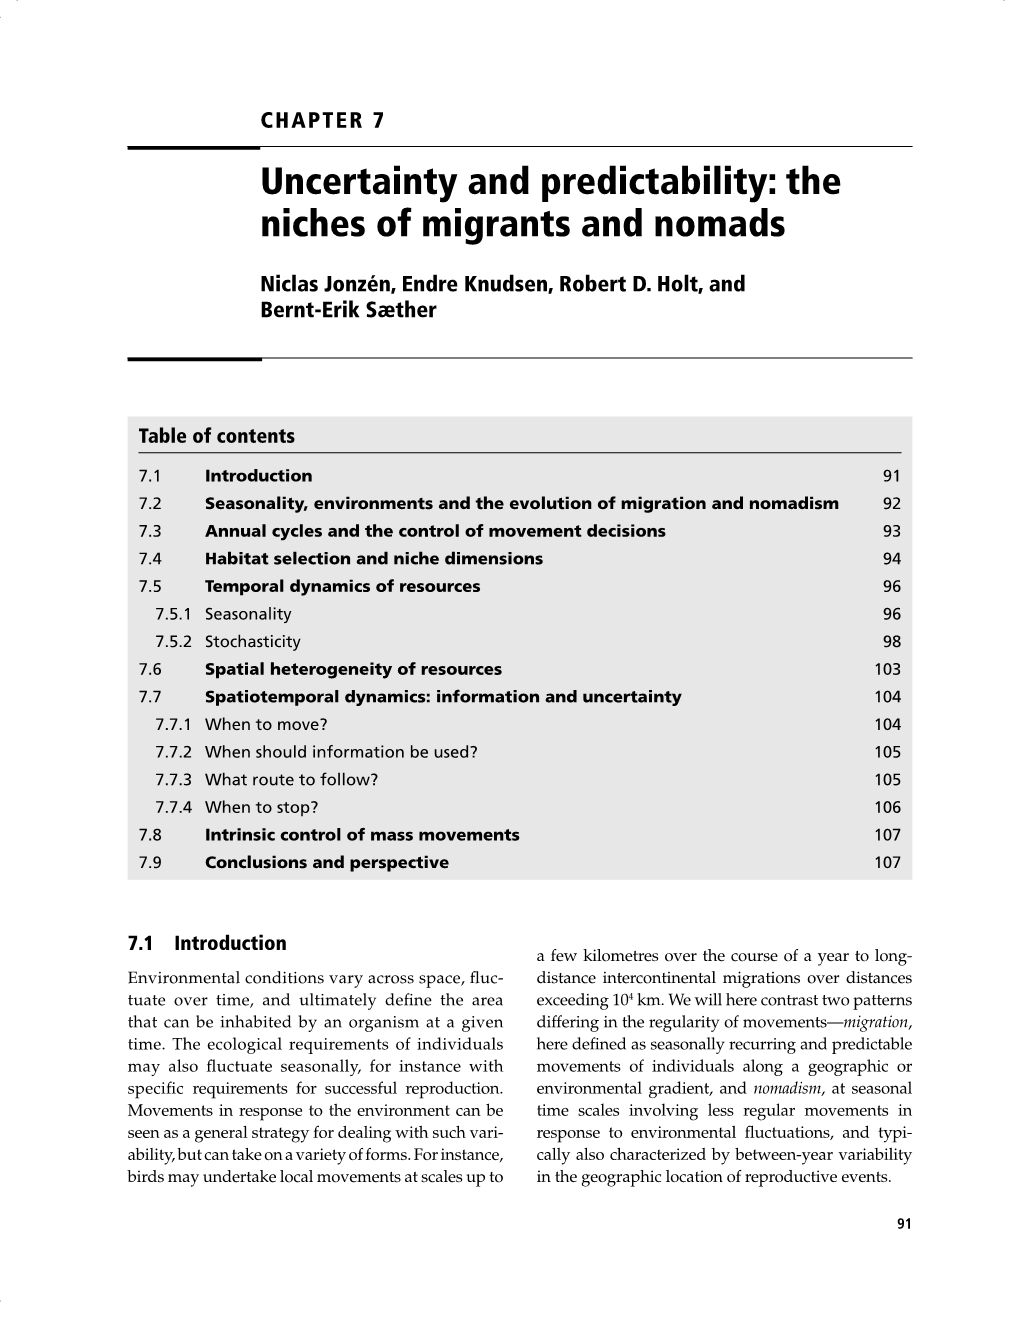 Uncertainty and Predictability: the Niches of Migrants and Nomads